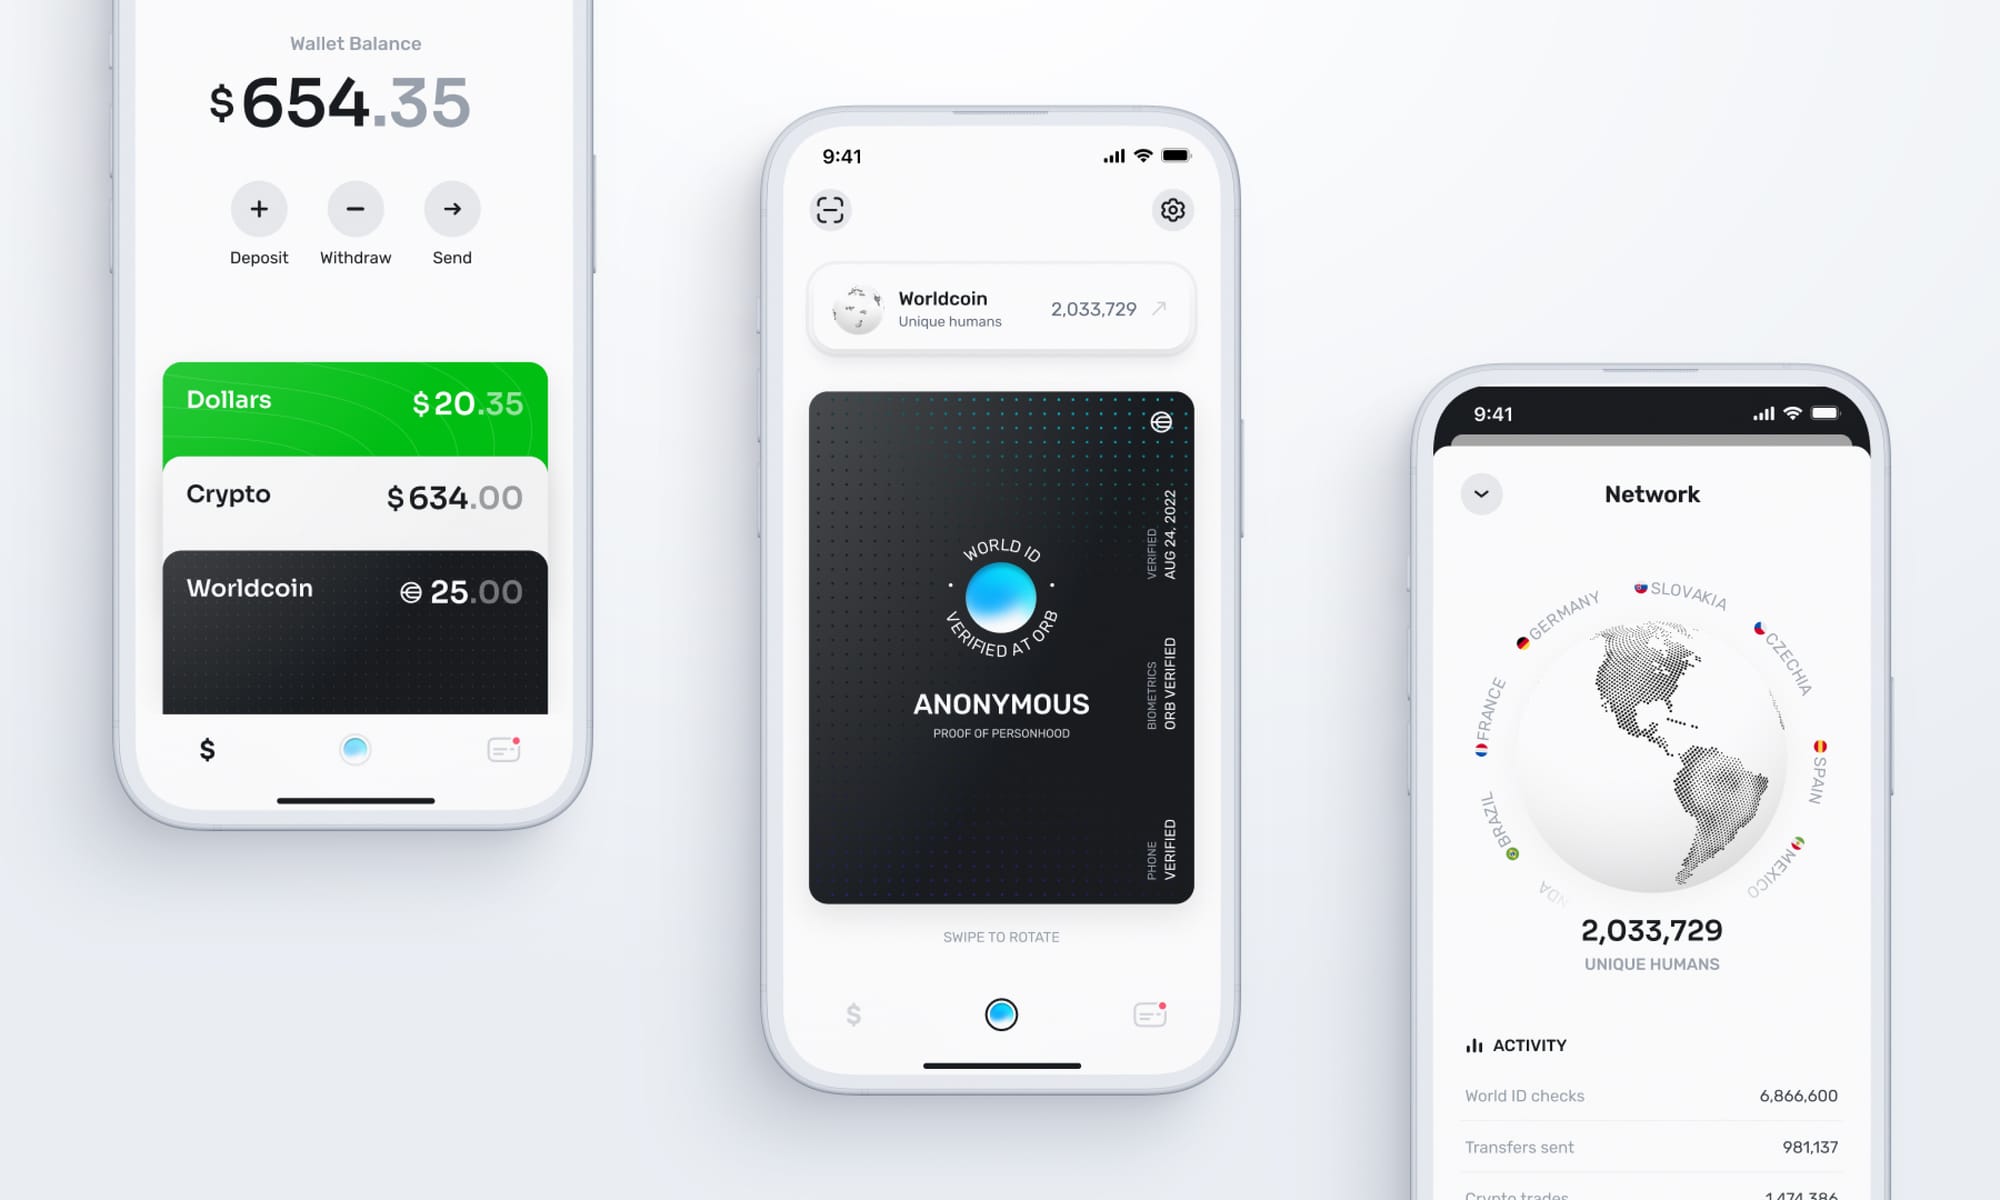 Three screenshots of a mobile app UI showing crypto wallet balances, a logo that says "World ID verified at Orb, anonymous proof of personhood", and a number of "unique humans" signed up to the app